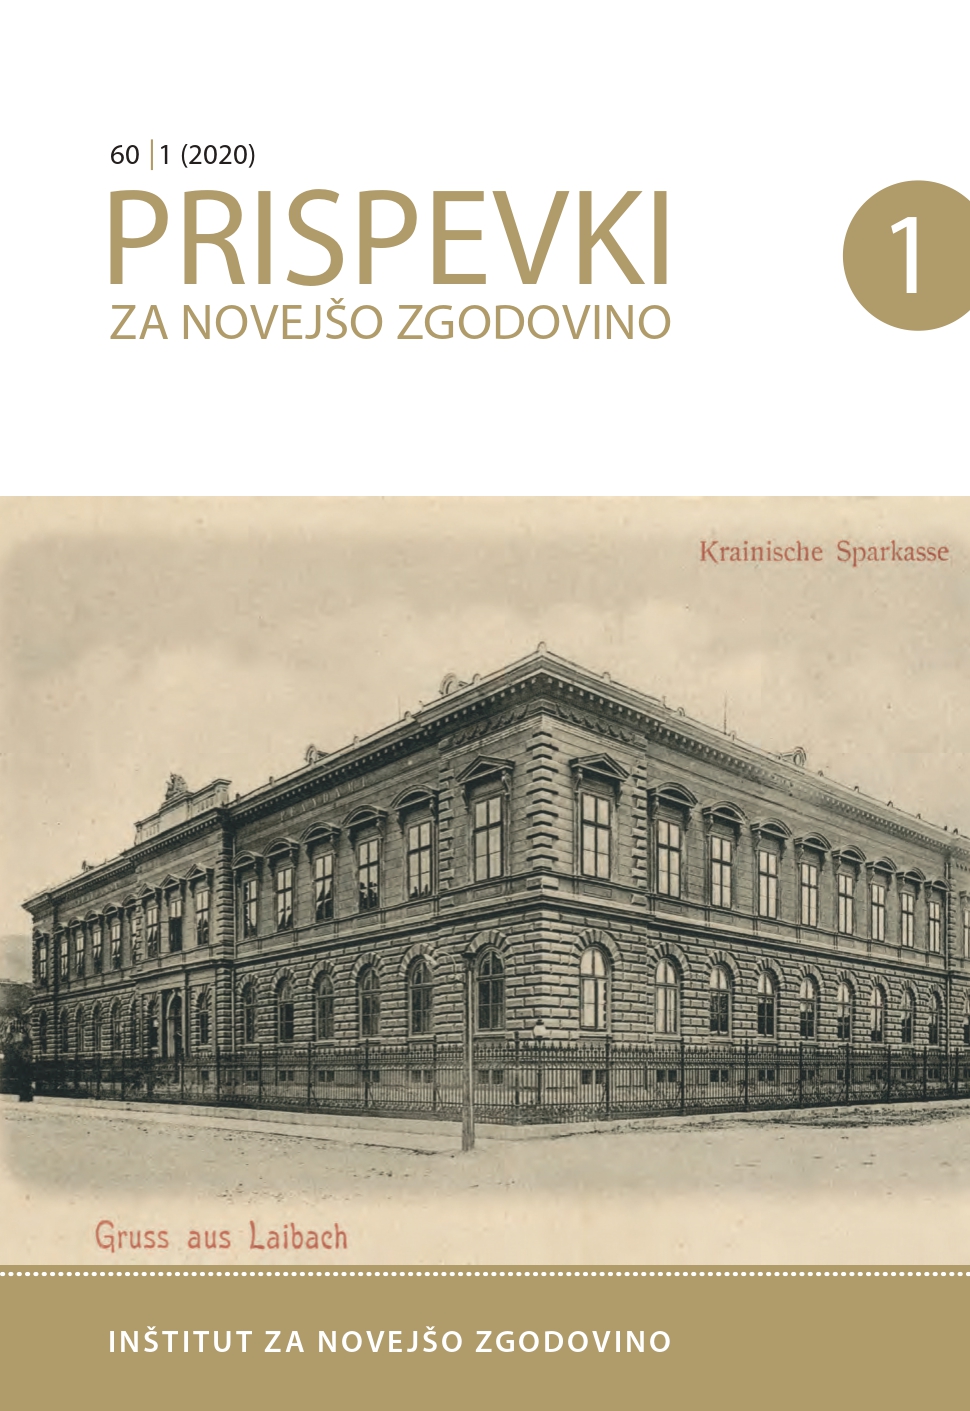 Carniolan Savings Bank and Slovenian-German Relations in 1908 and 1909